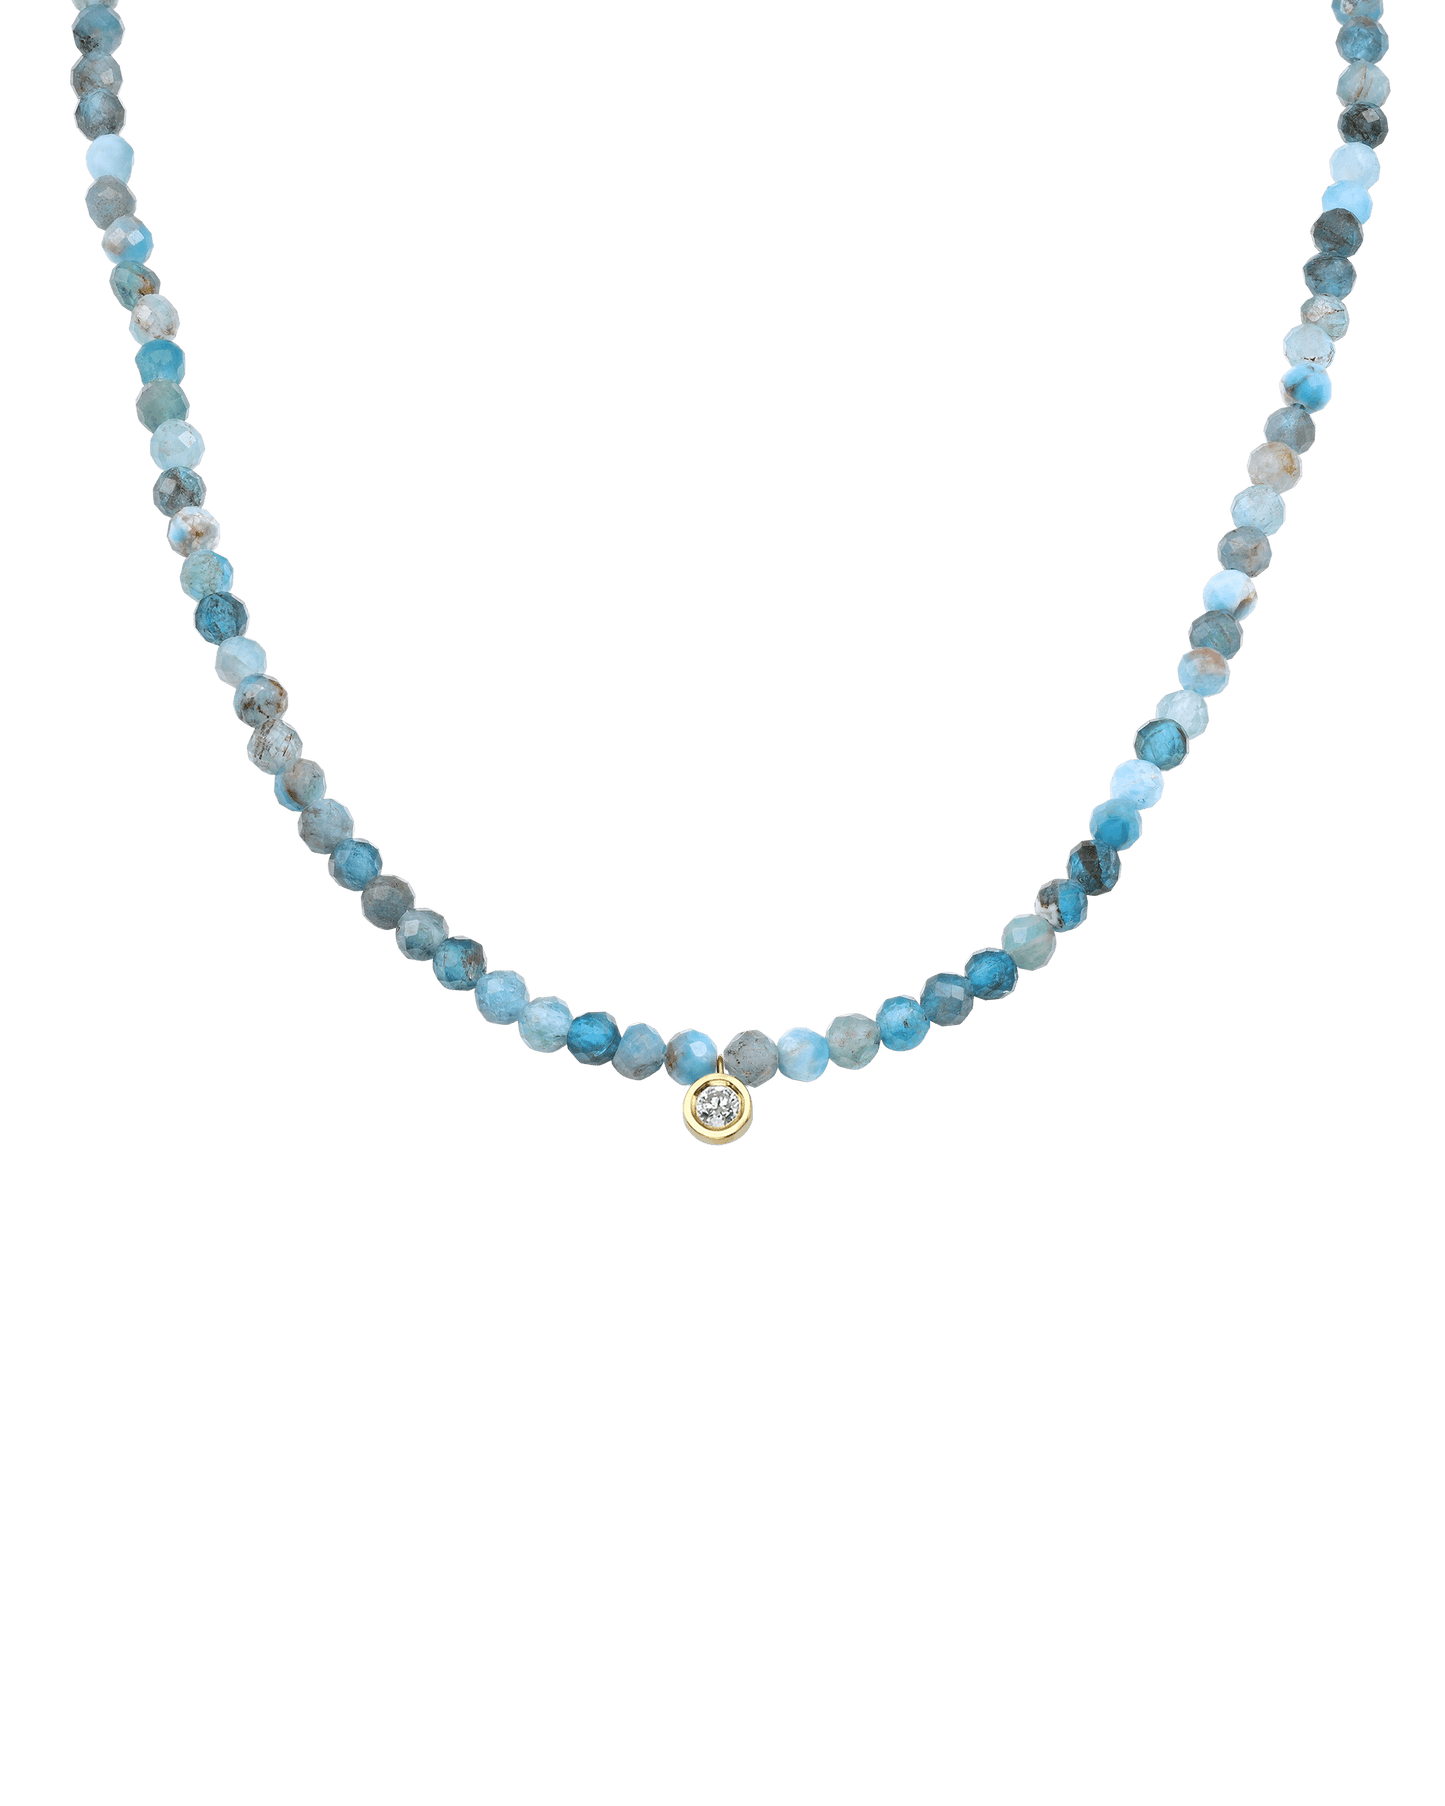 Apatite Gemstone & Diamond Necklace - 14K Yellow Gold Necklaces 14K Solid Gold Natural Turquoise Medium: 0.05ct 14"